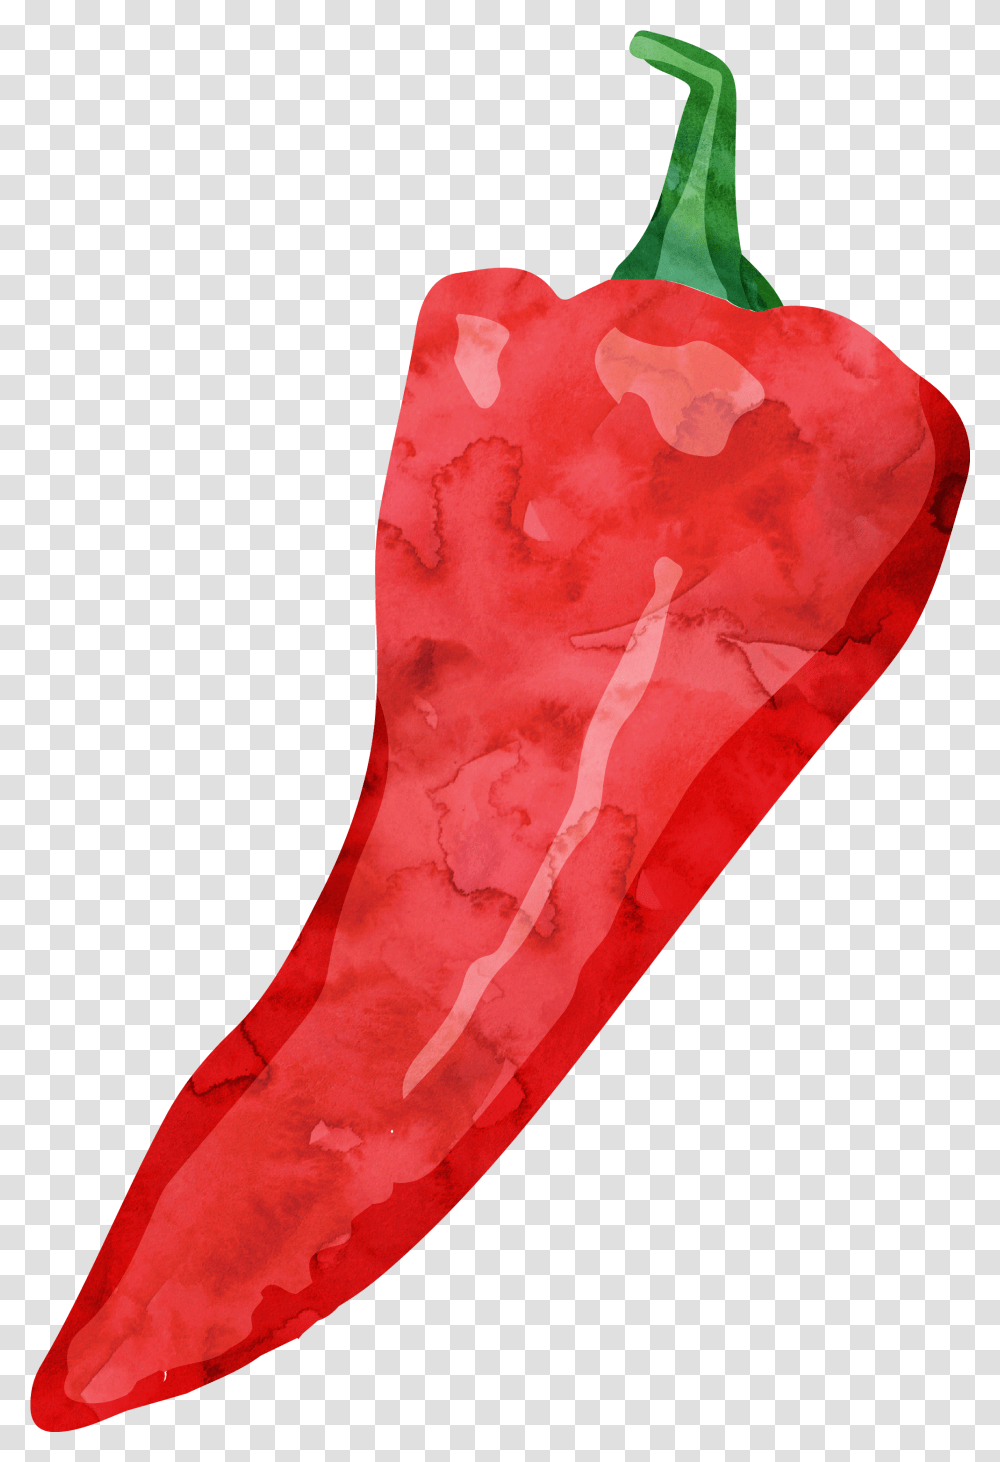 Royalty Free Stock Tabasco Pepper Cayenne Watercolor Jalapeno Watercolor Pepper, Clothing, Apparel, Heart Transparent Png